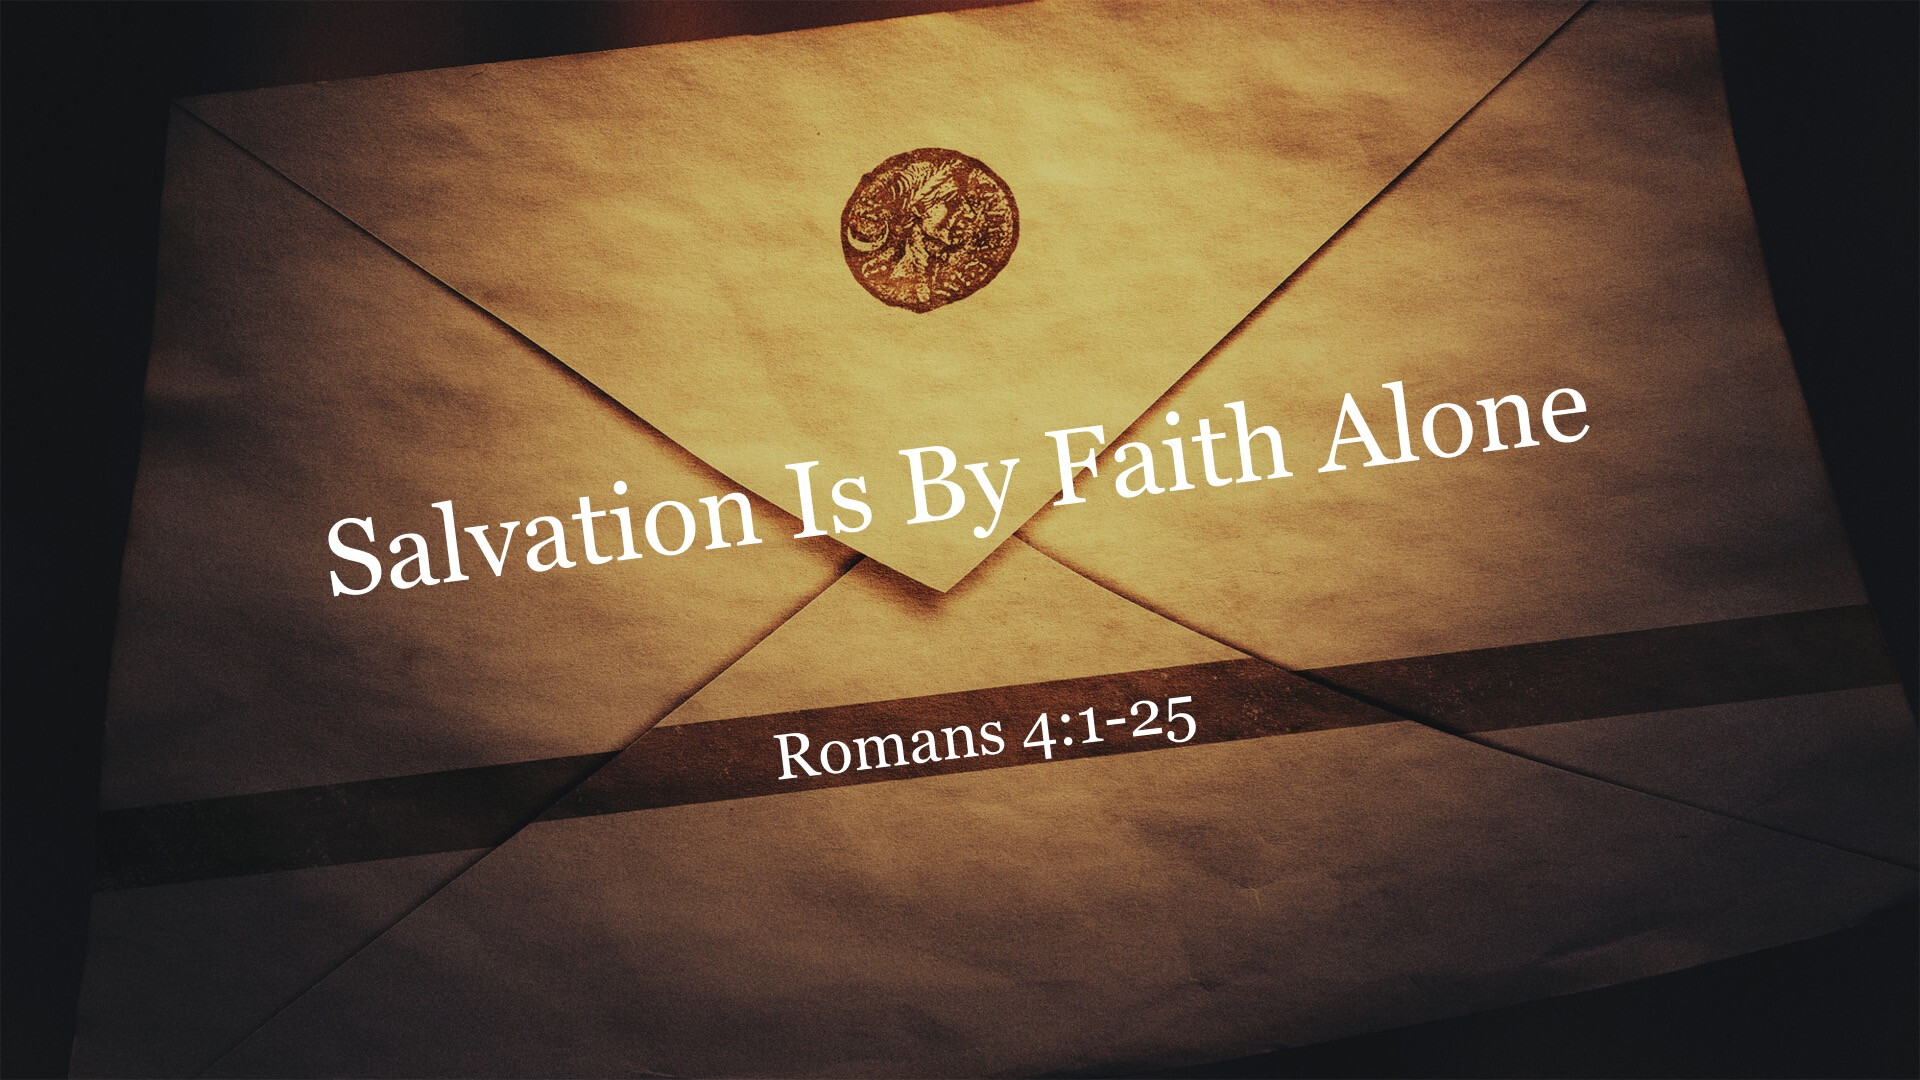 Salvation is by Faith Alone